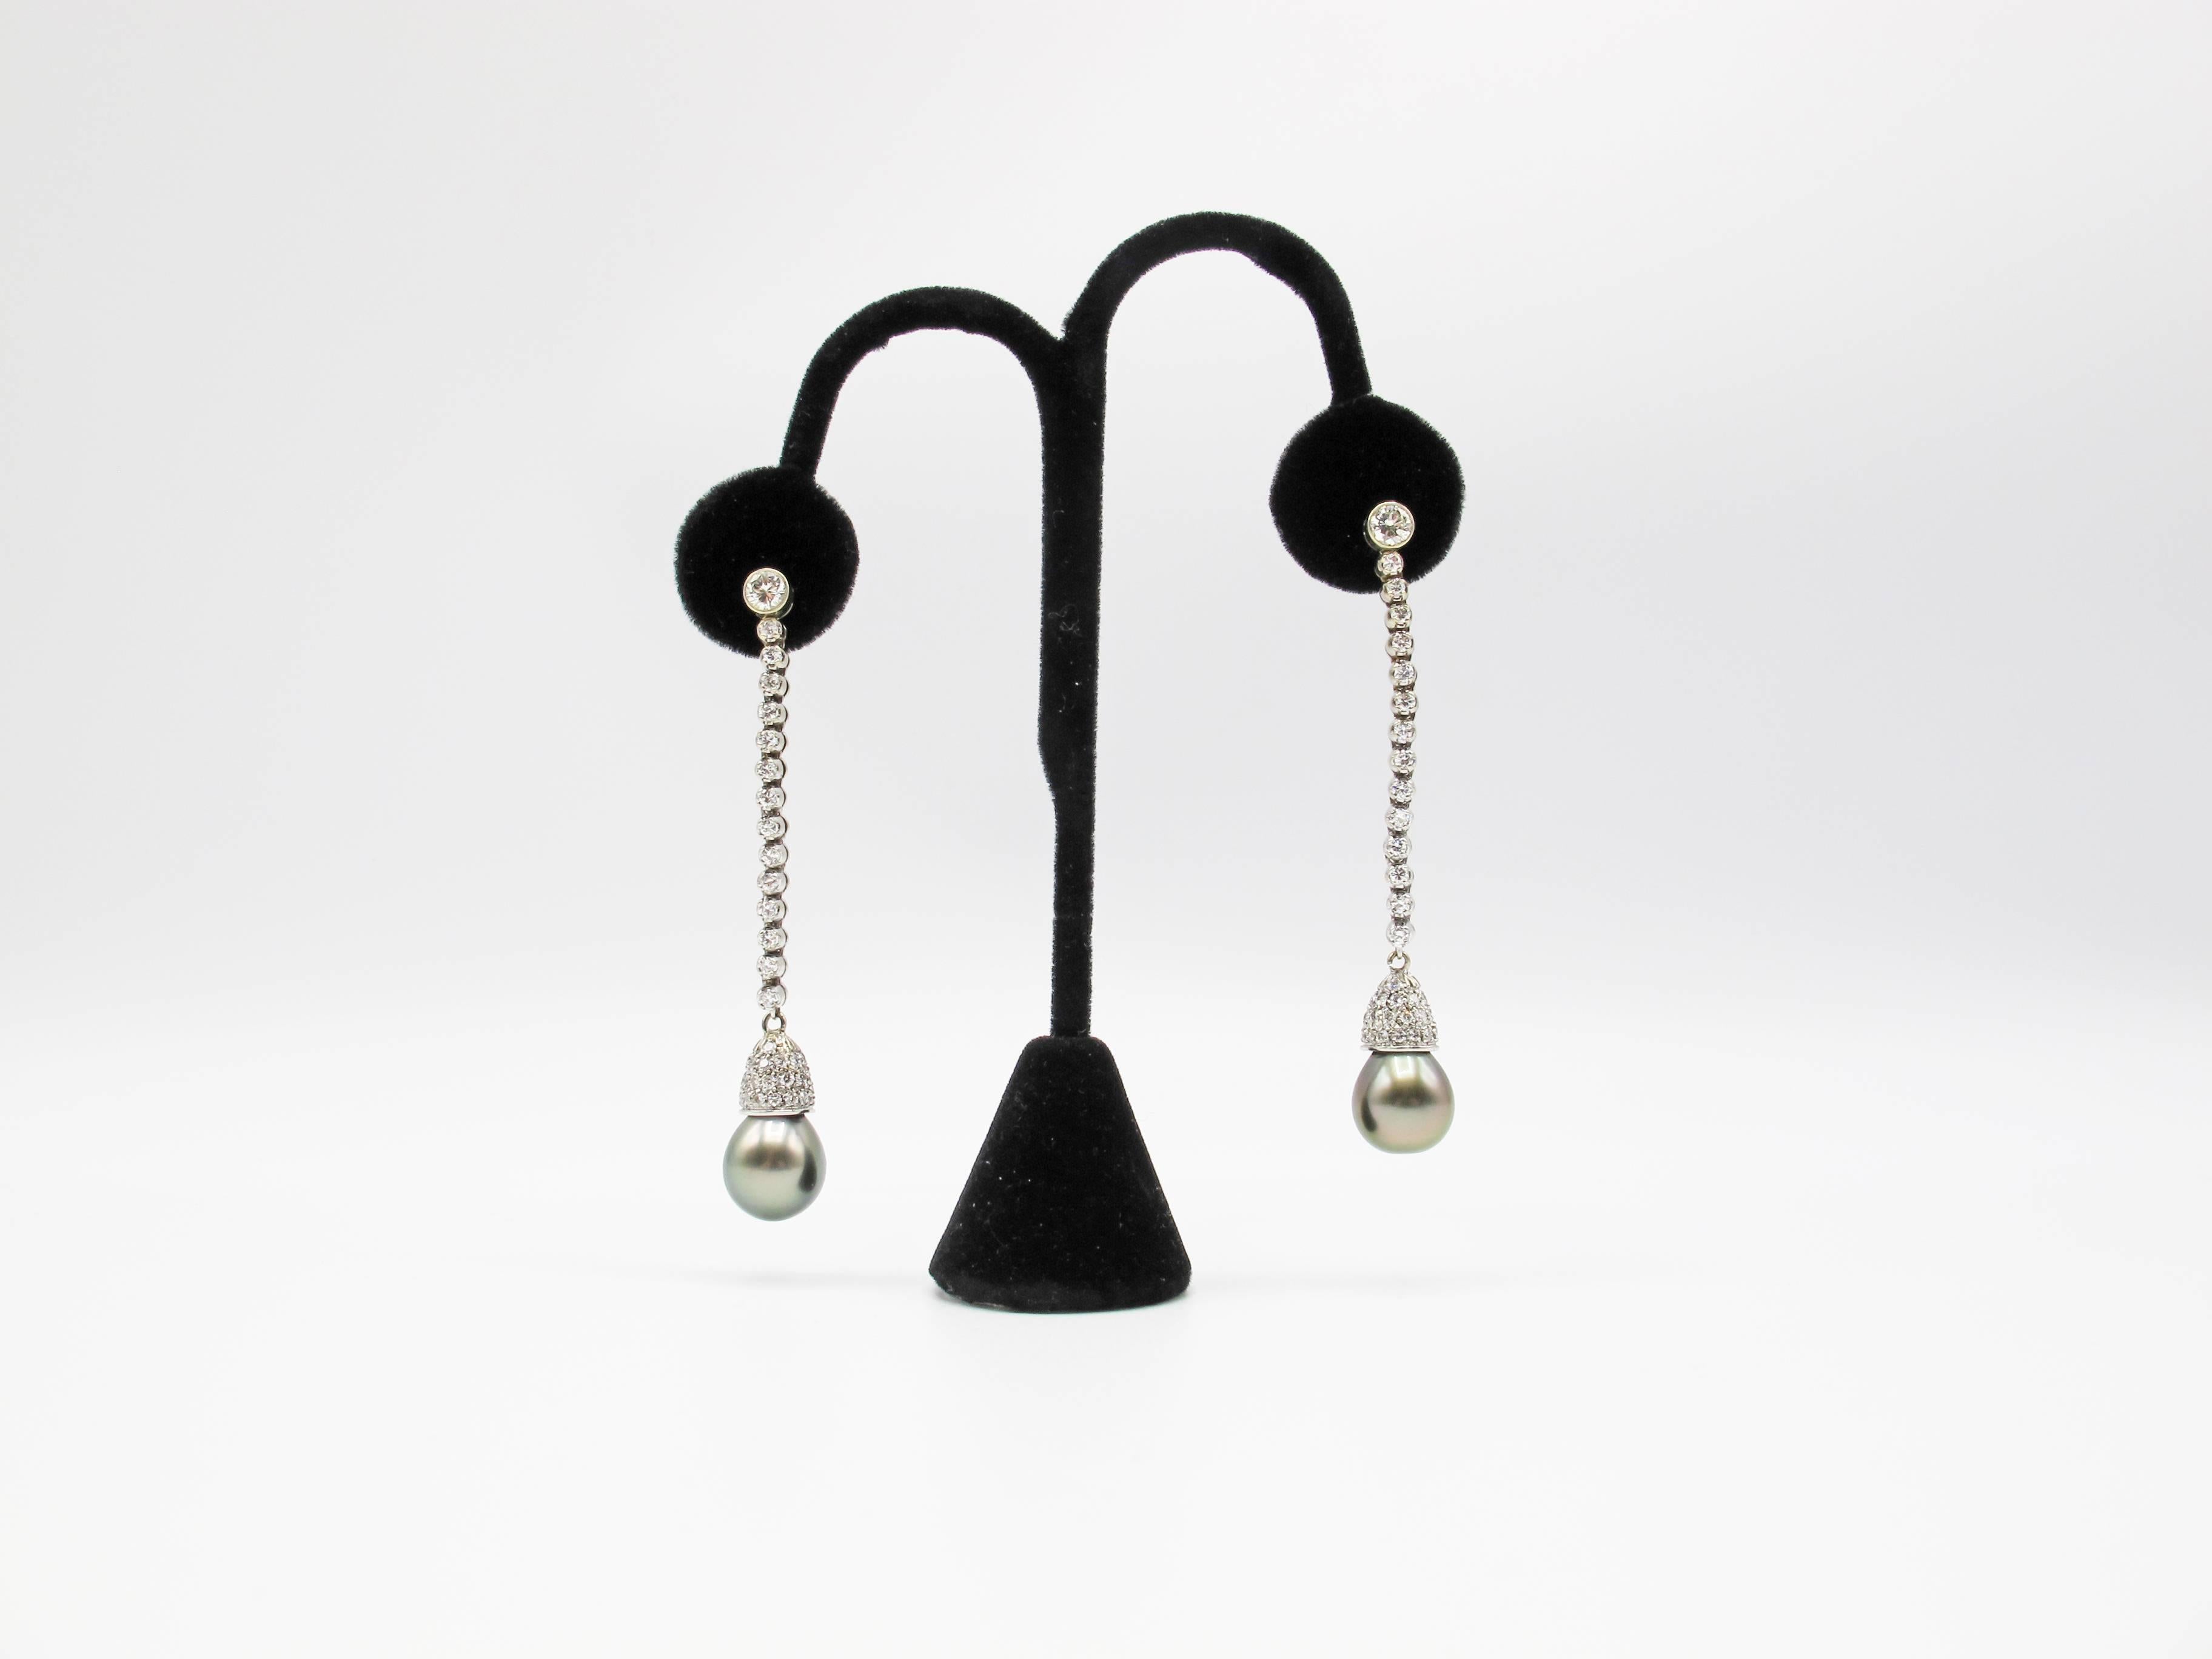 A pair of perfectly matched 12.2 mm Tahitian dark silvery grey South Sea pearls , set in a diamond encrusted cup, extend from a 2” long strand of brilliant cut diamonds,The thick nacre of the pearls give them an incredible luster, with the surface